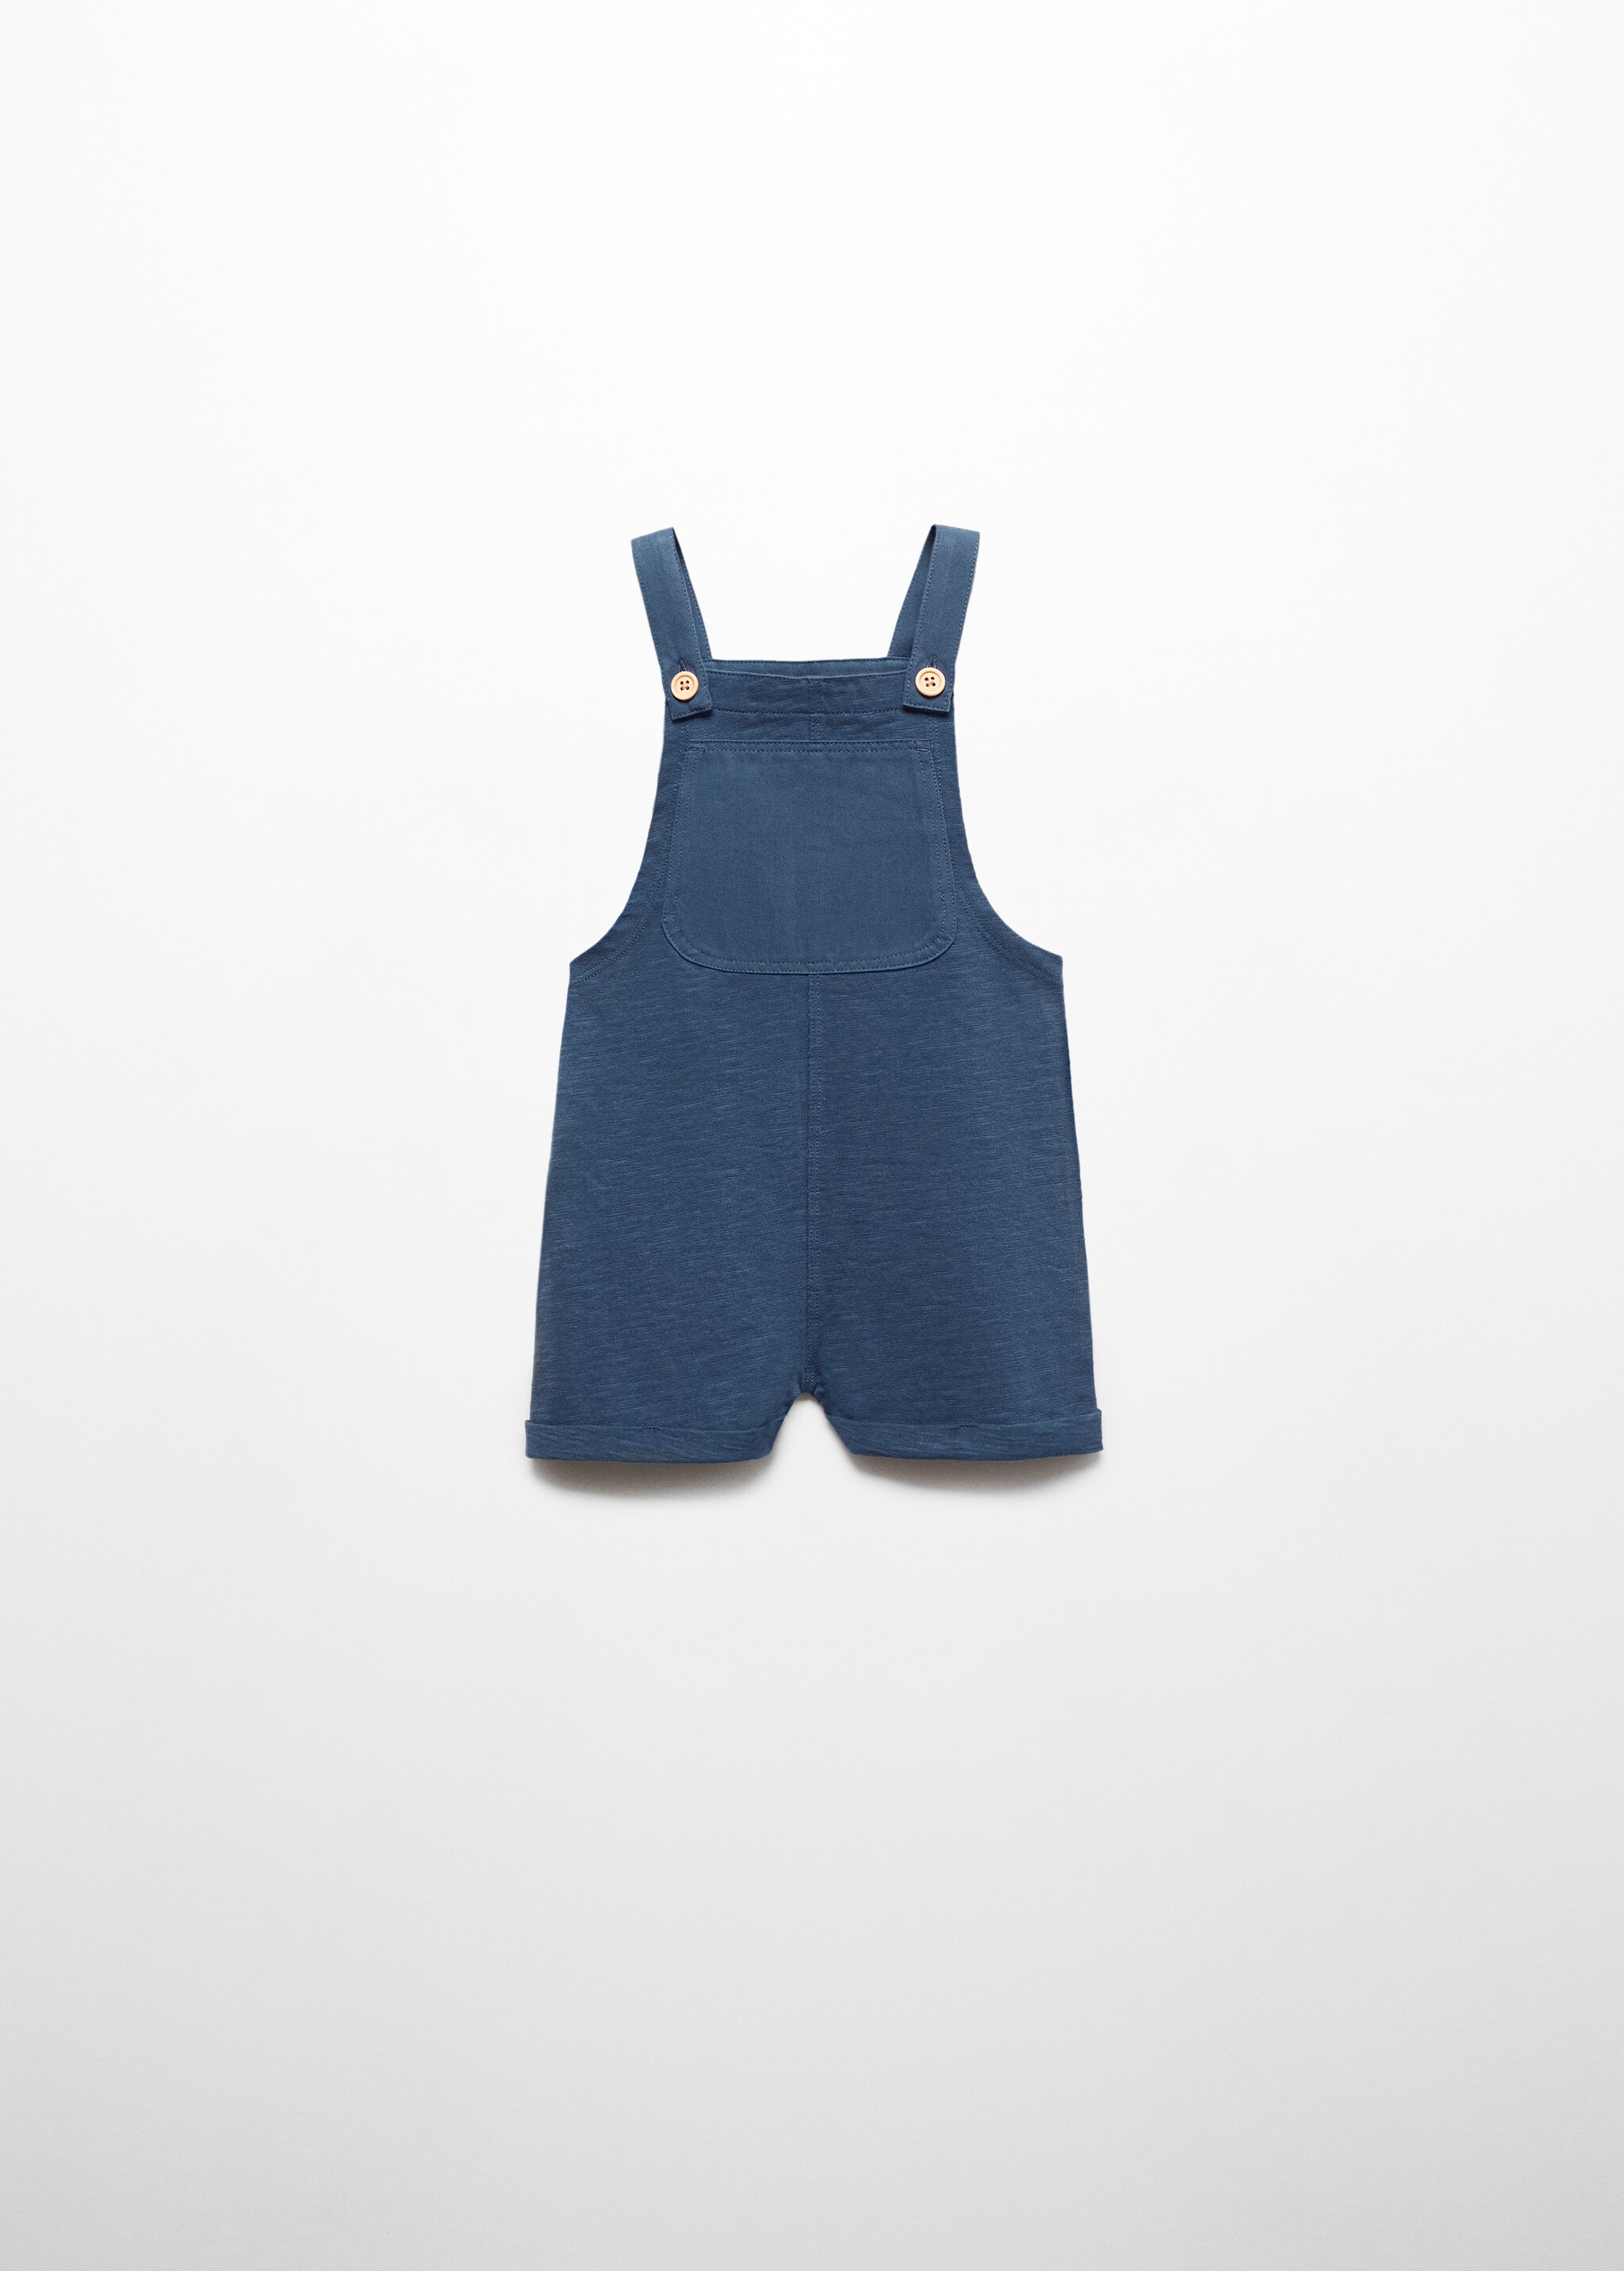 Cotton dungarees - Article without model